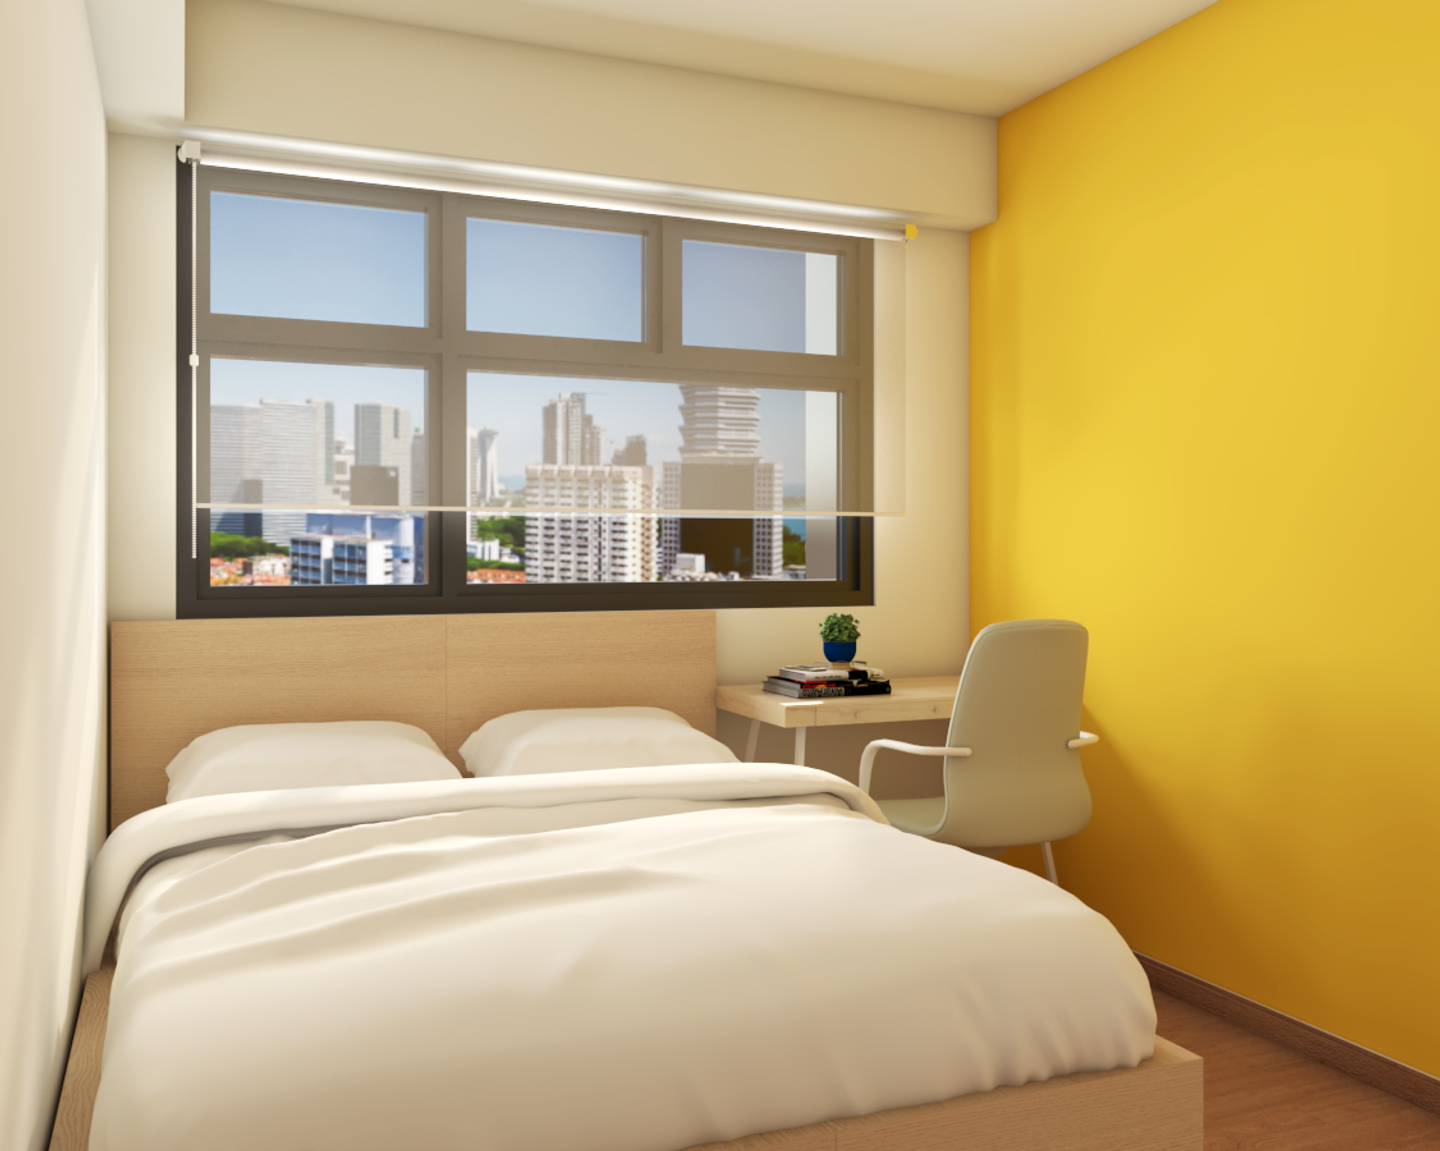 Master Bedroom Design With Pop of Yellow Colour - Livspace